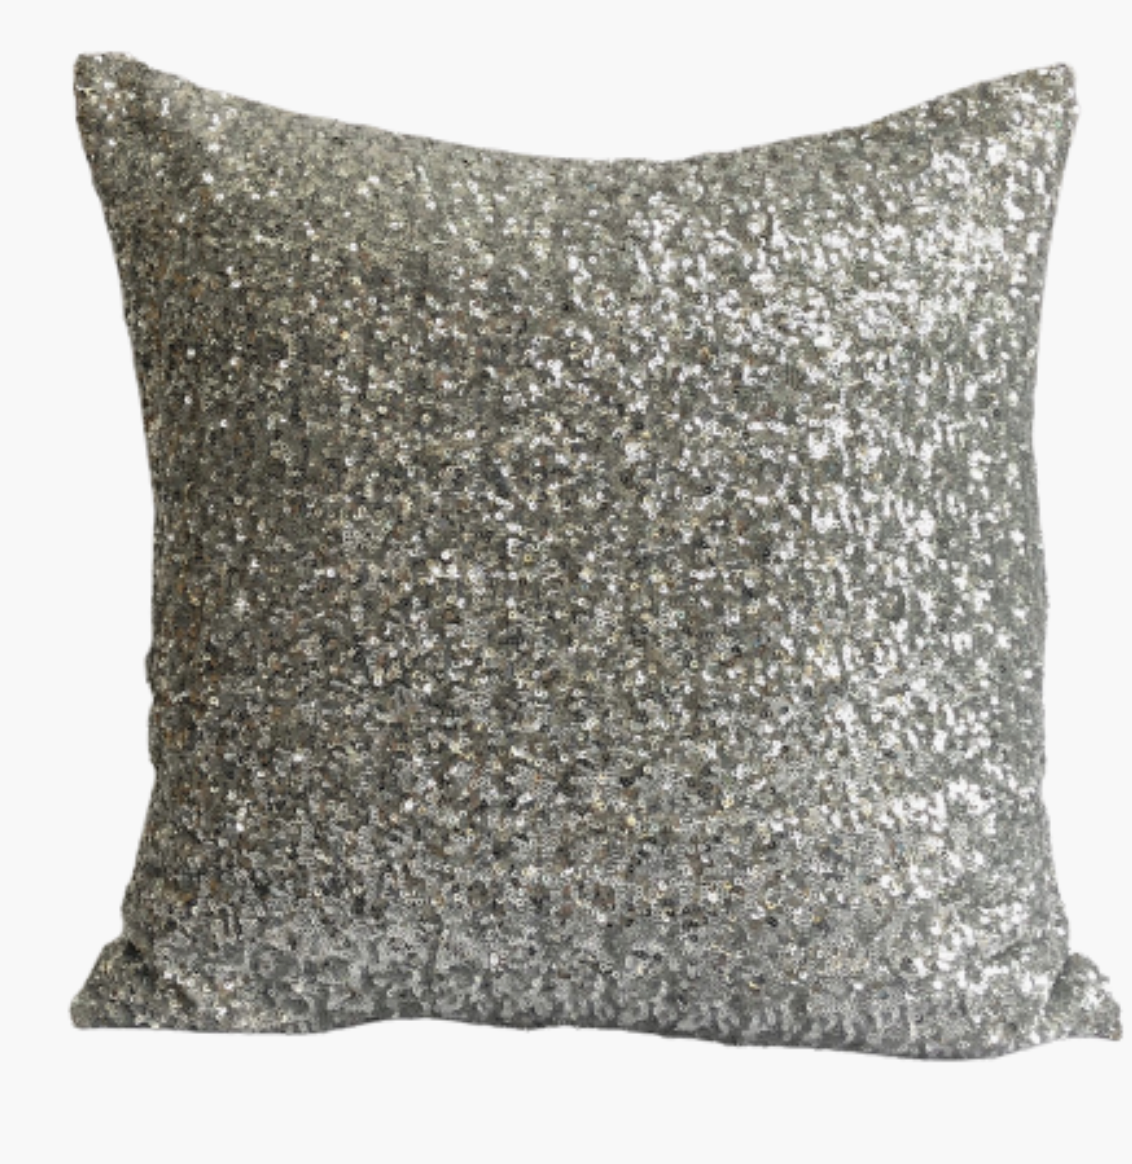 Sparkly Silver Sequinned Cushion Cover